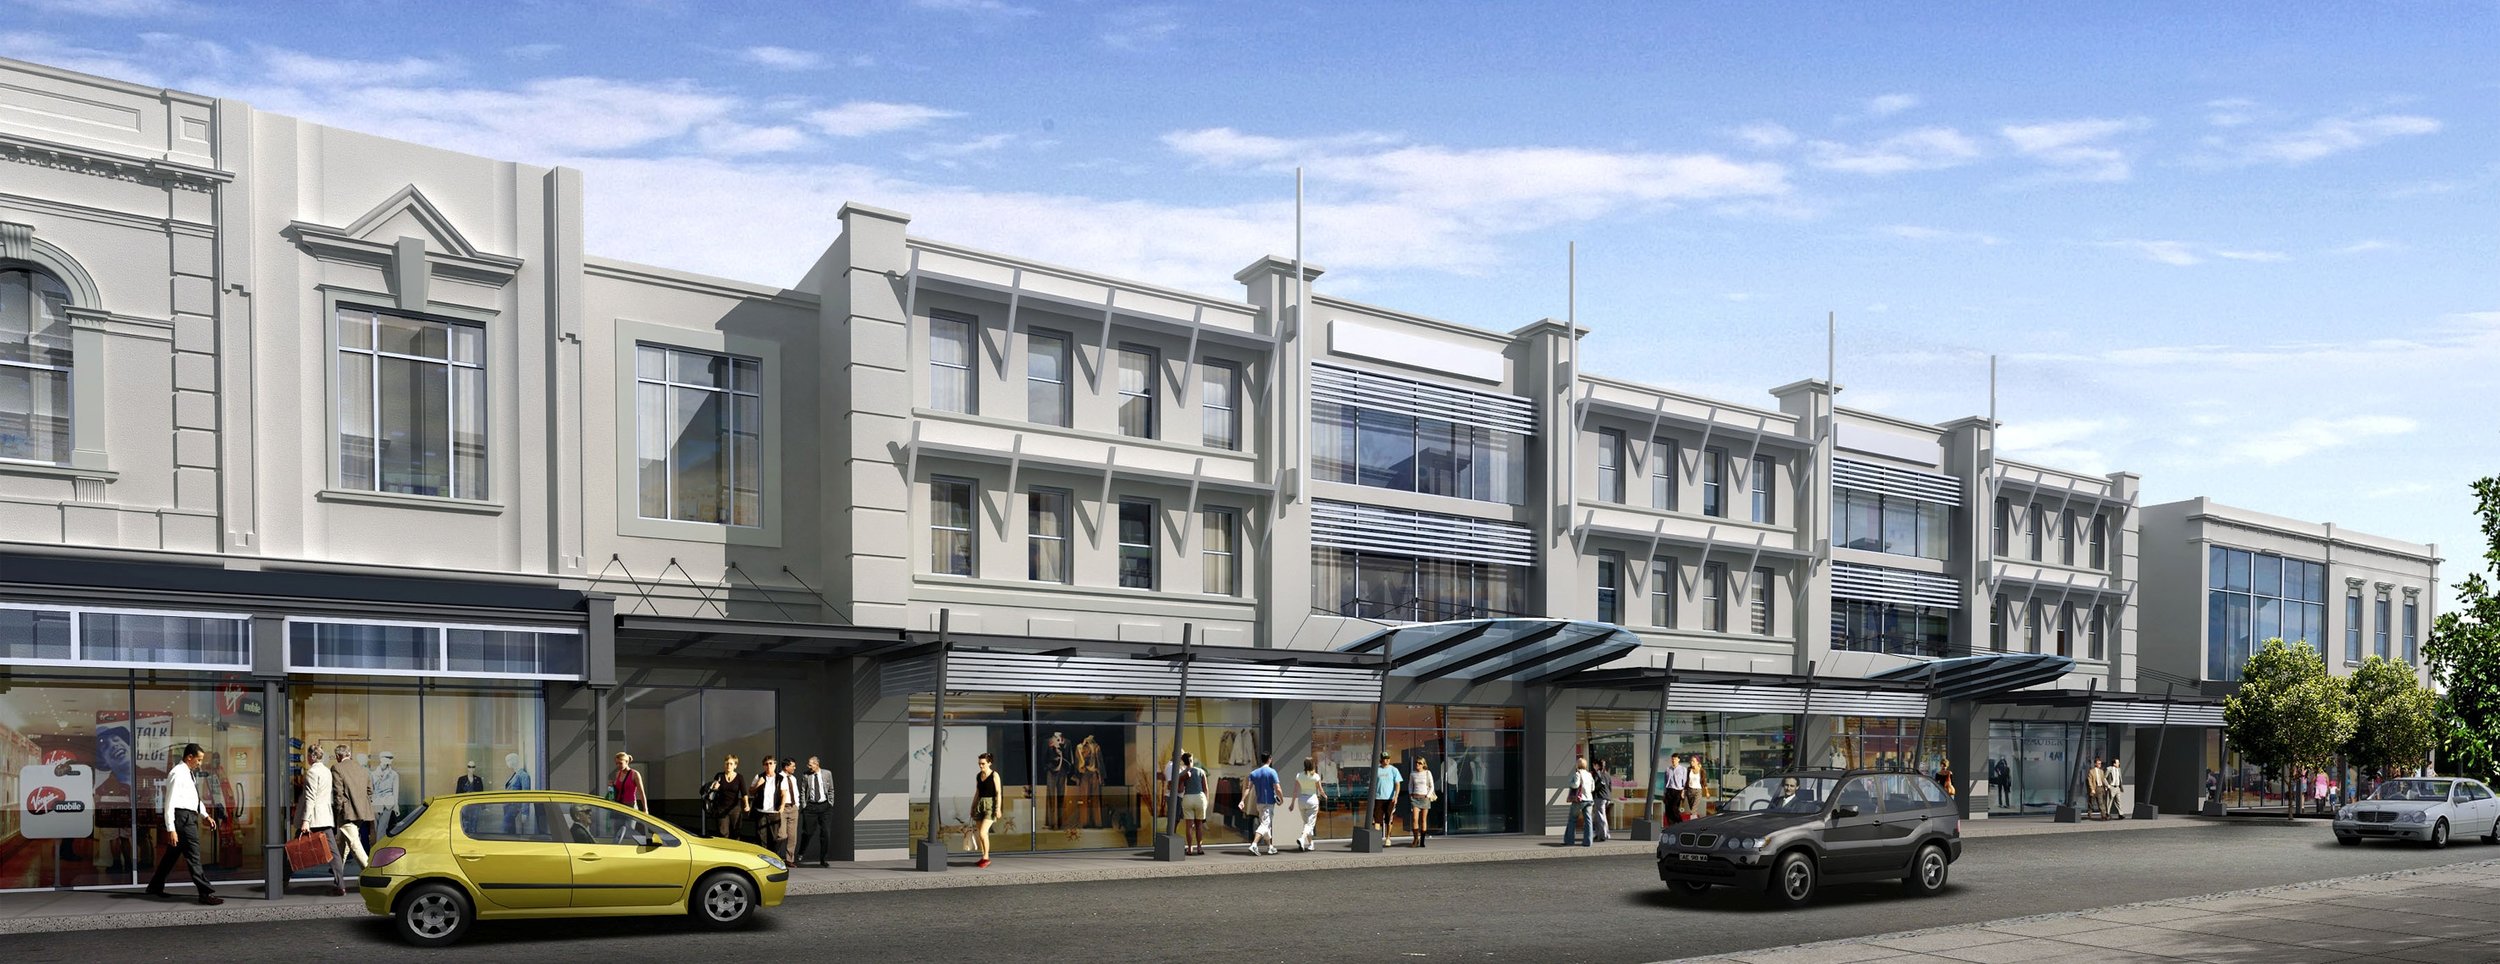 Stirling Square Retail/Commercial Development